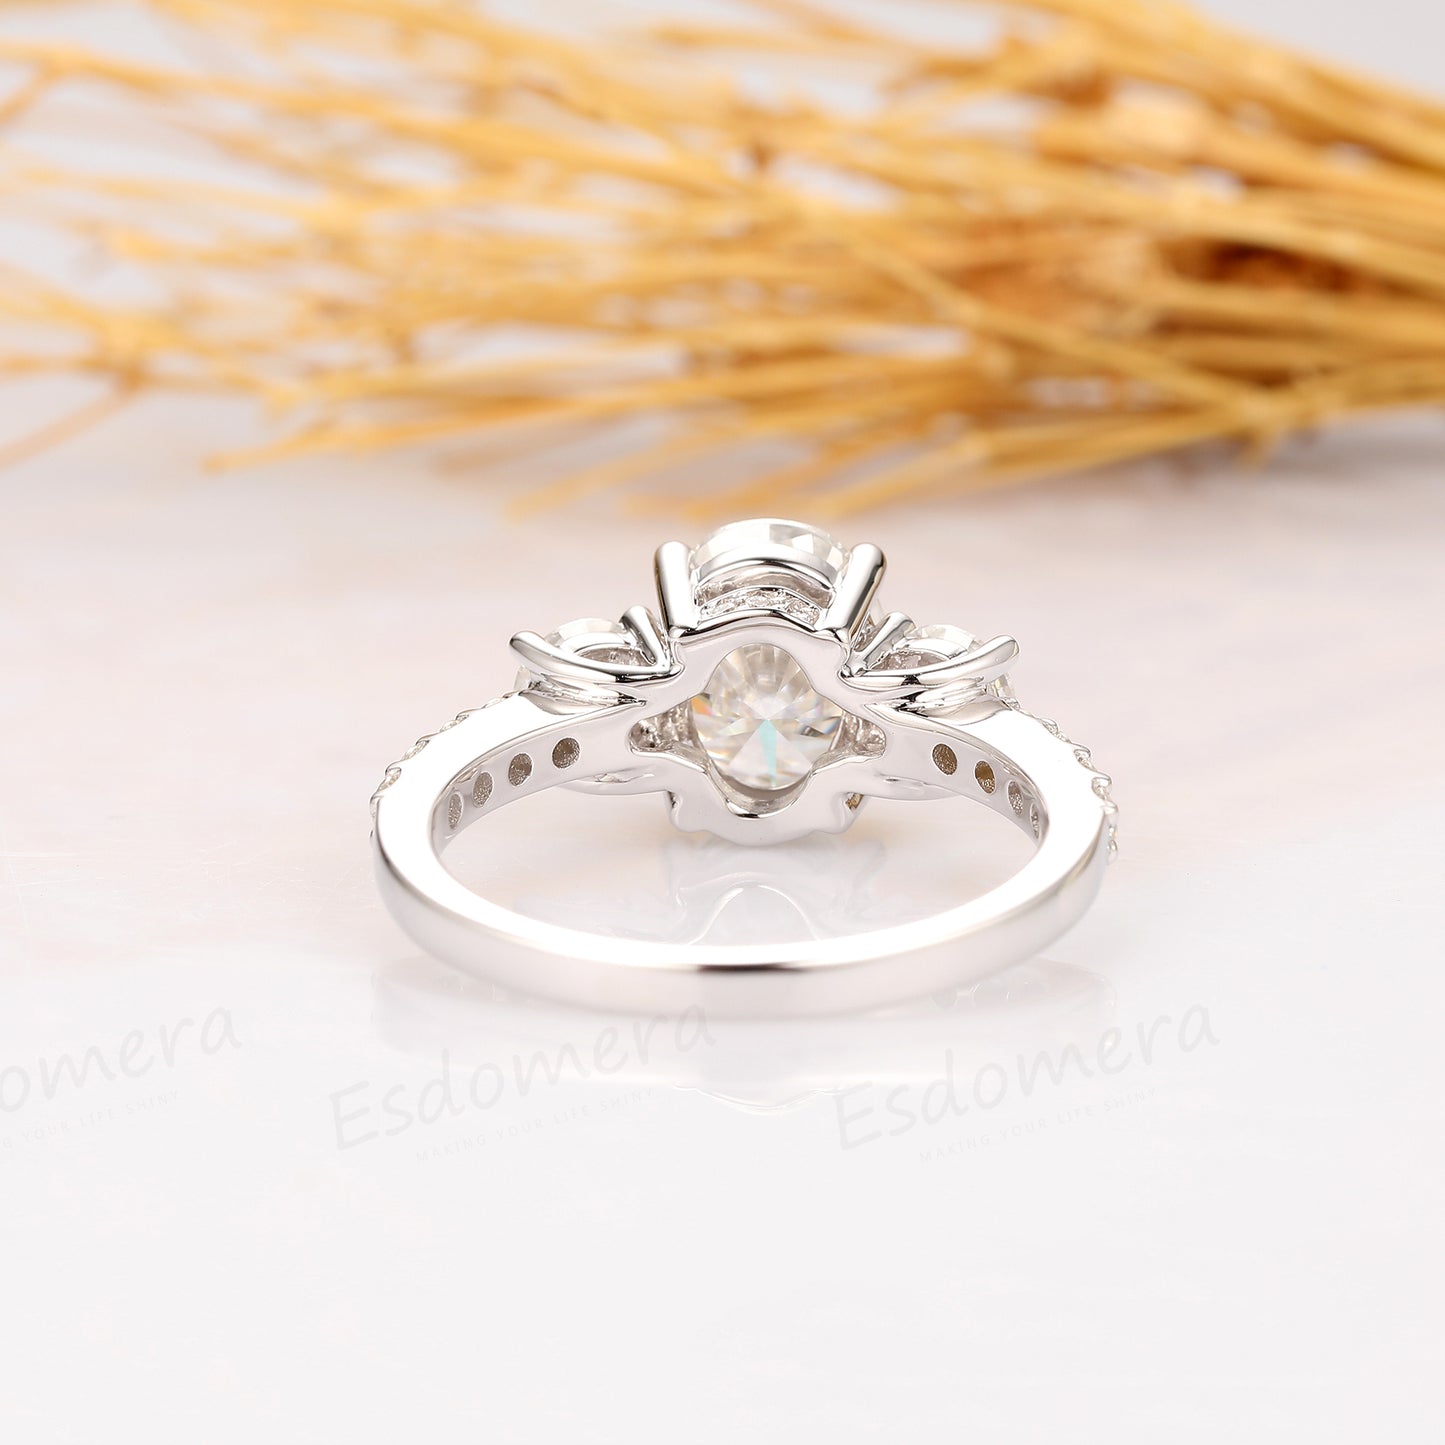 2.1CT Oval Cut Moissanite Engagement Ring, 3 Stones Wedding Ring